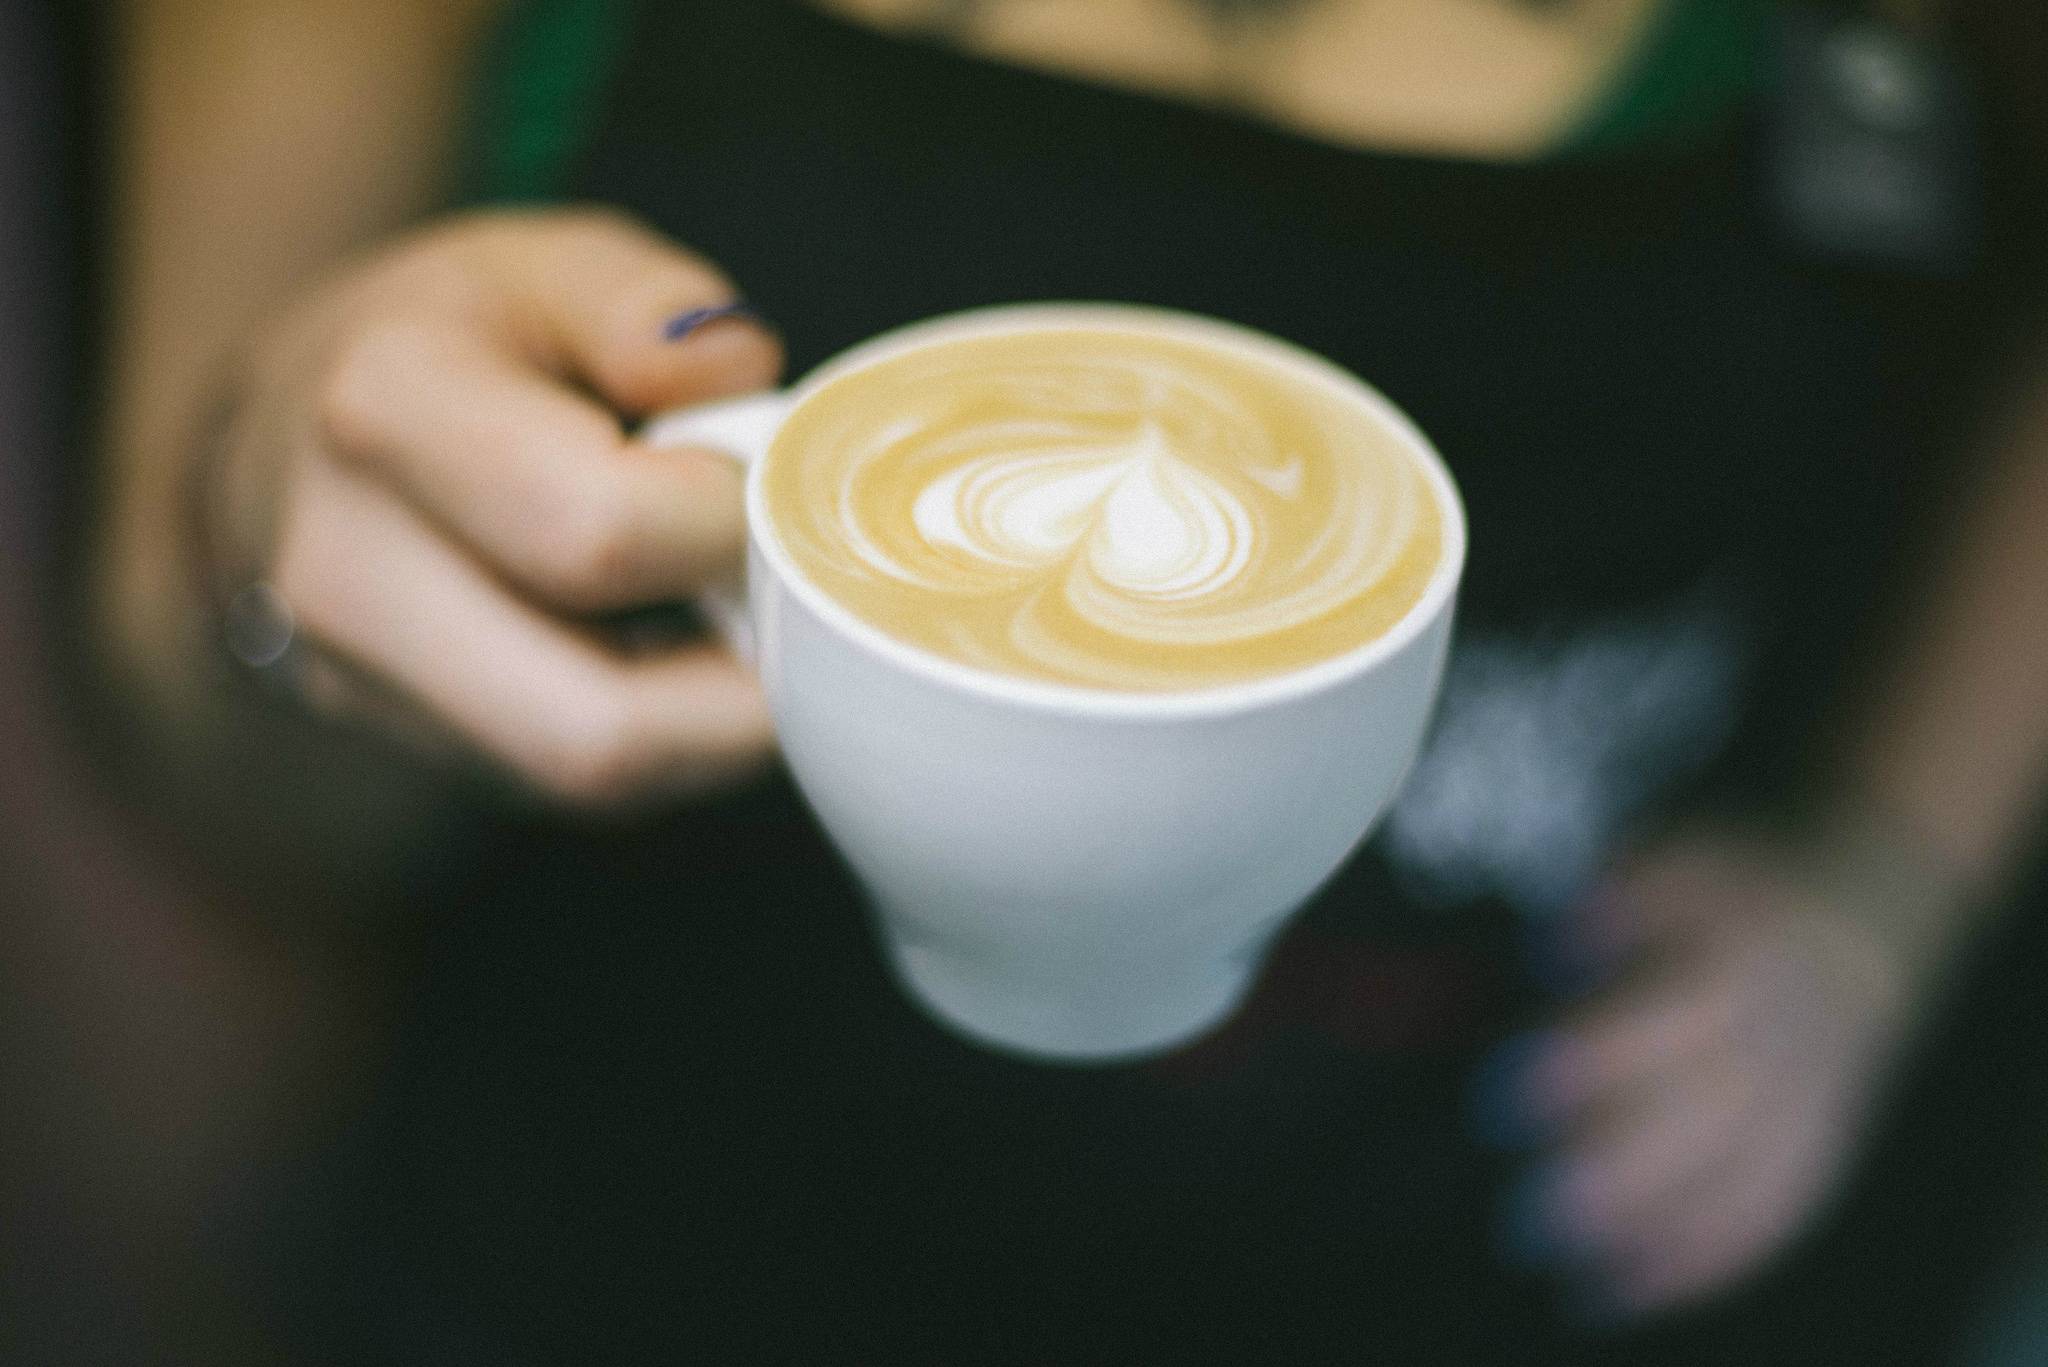 American daily coffee consumption is on the rise